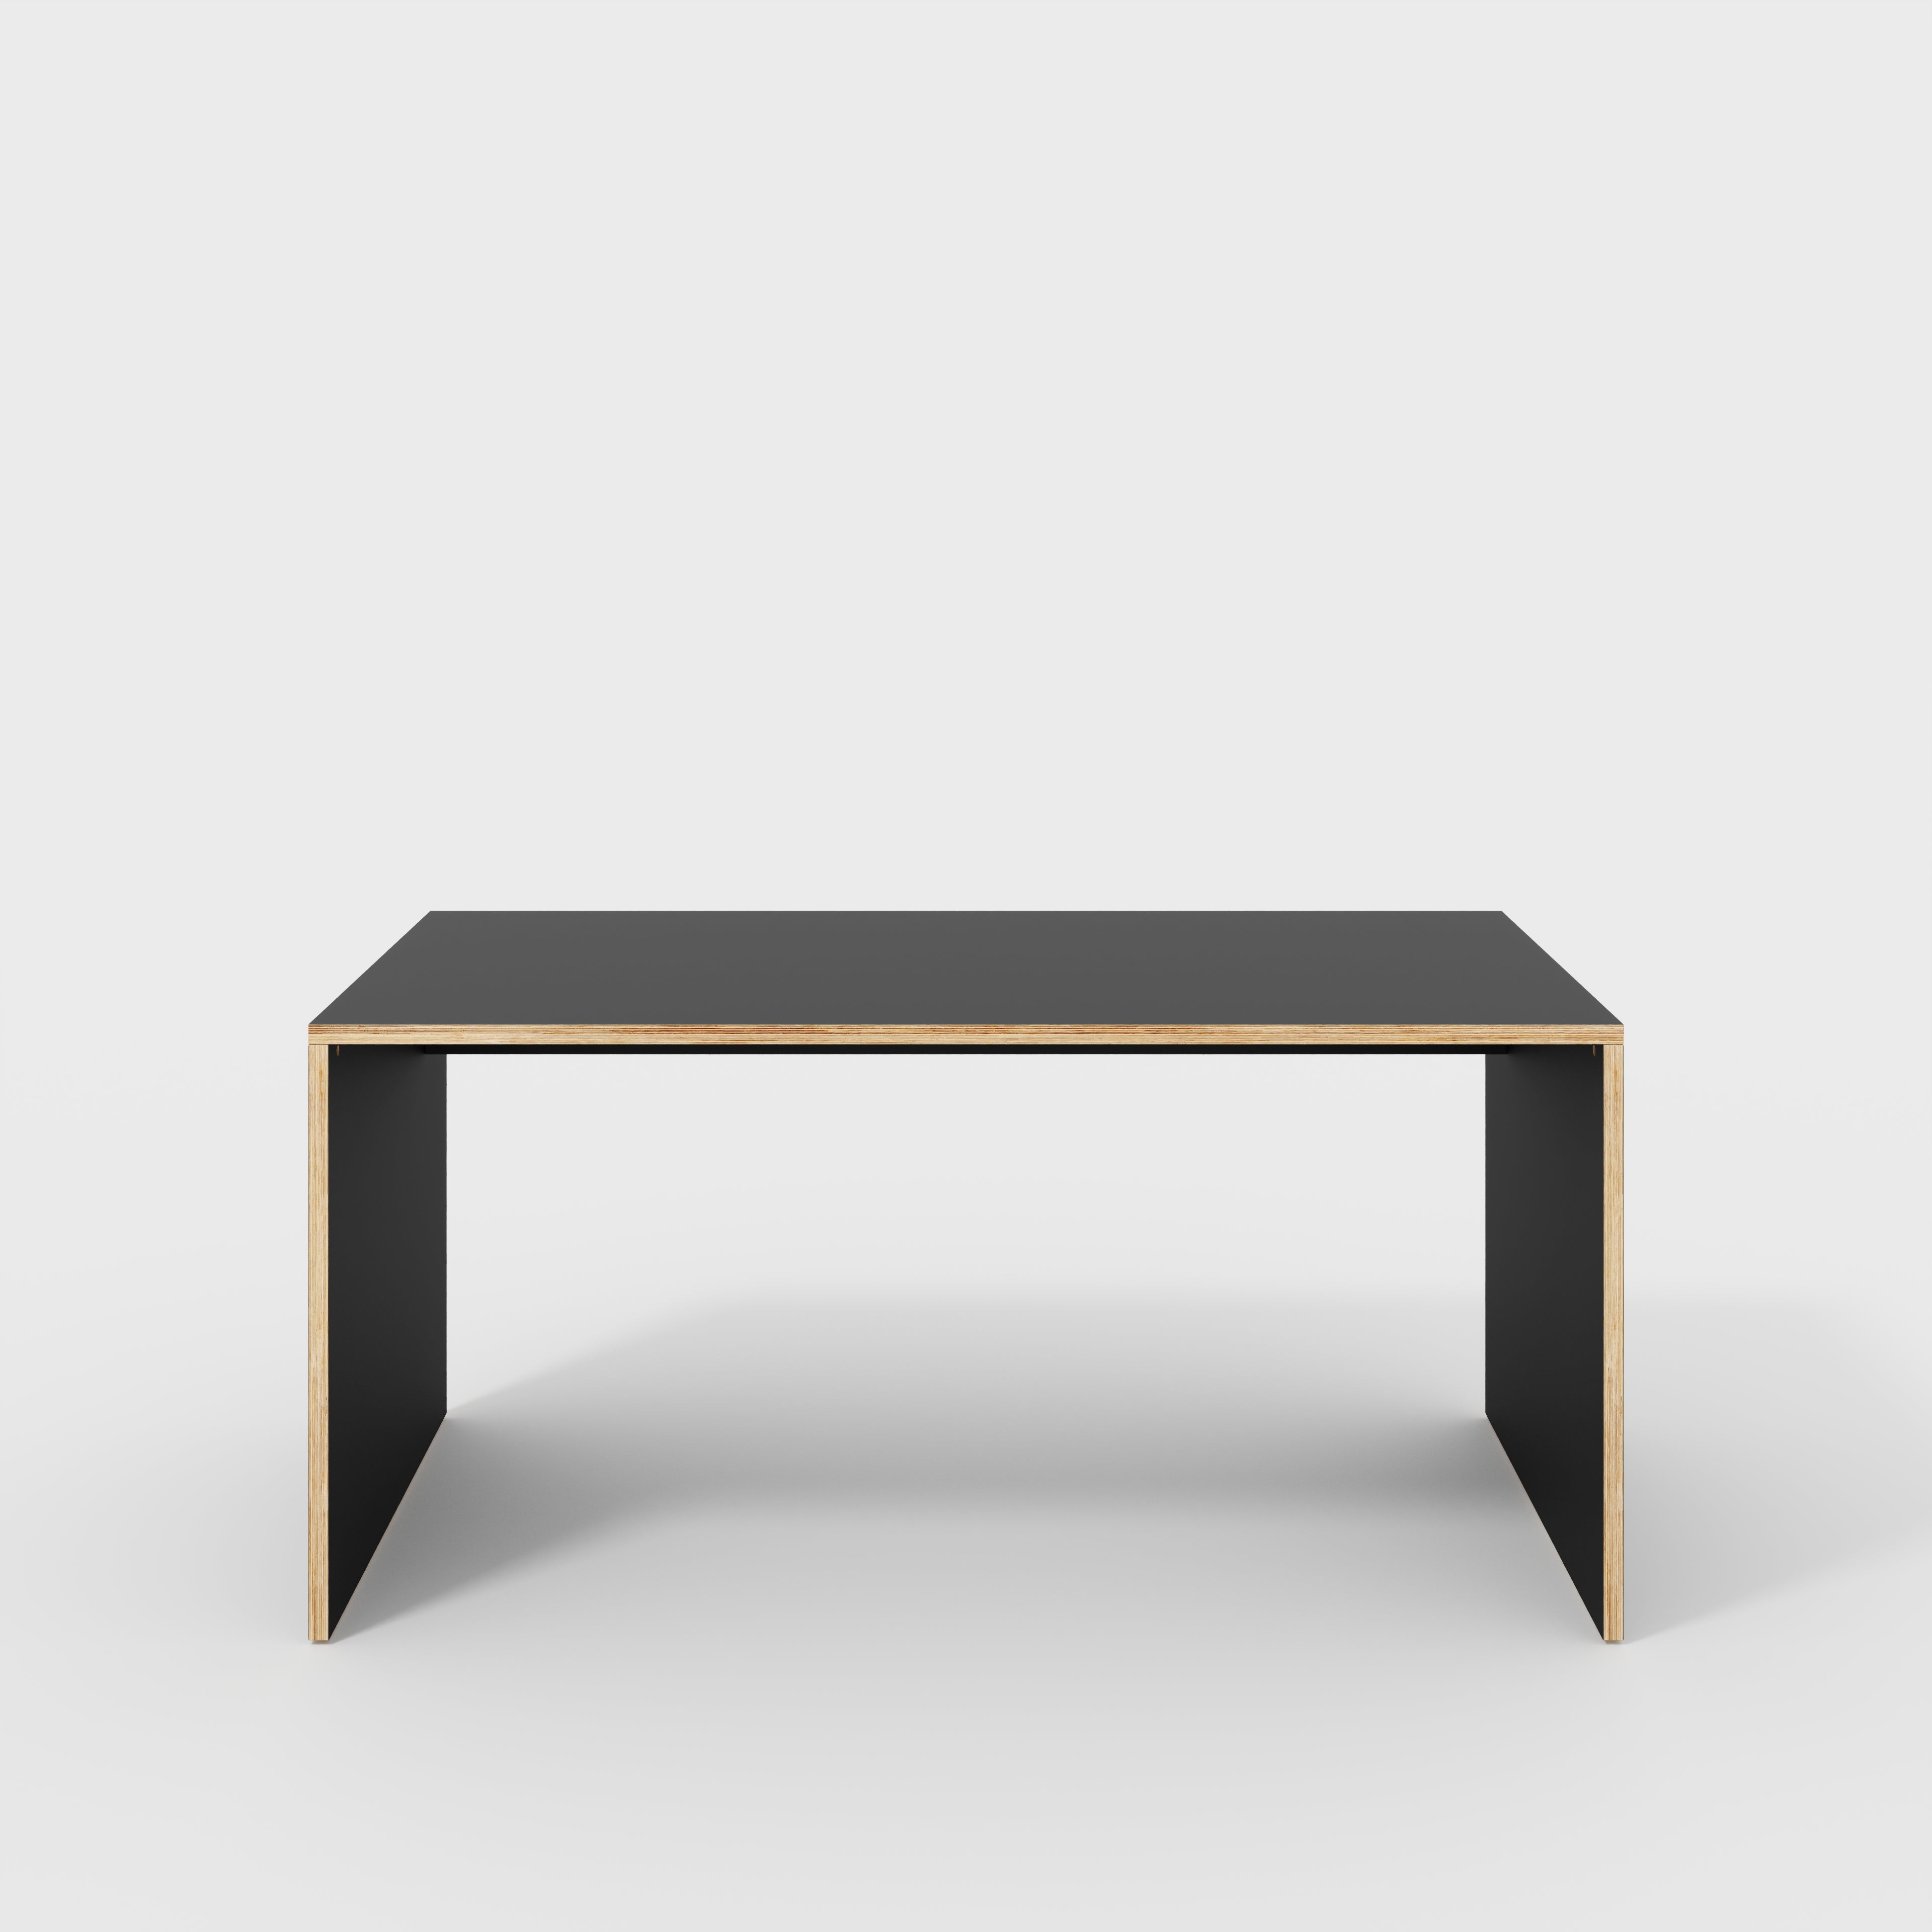 Desk with Solid Sides - Formica Diamond Black - 1600(w) x 800(d) x 750(h)